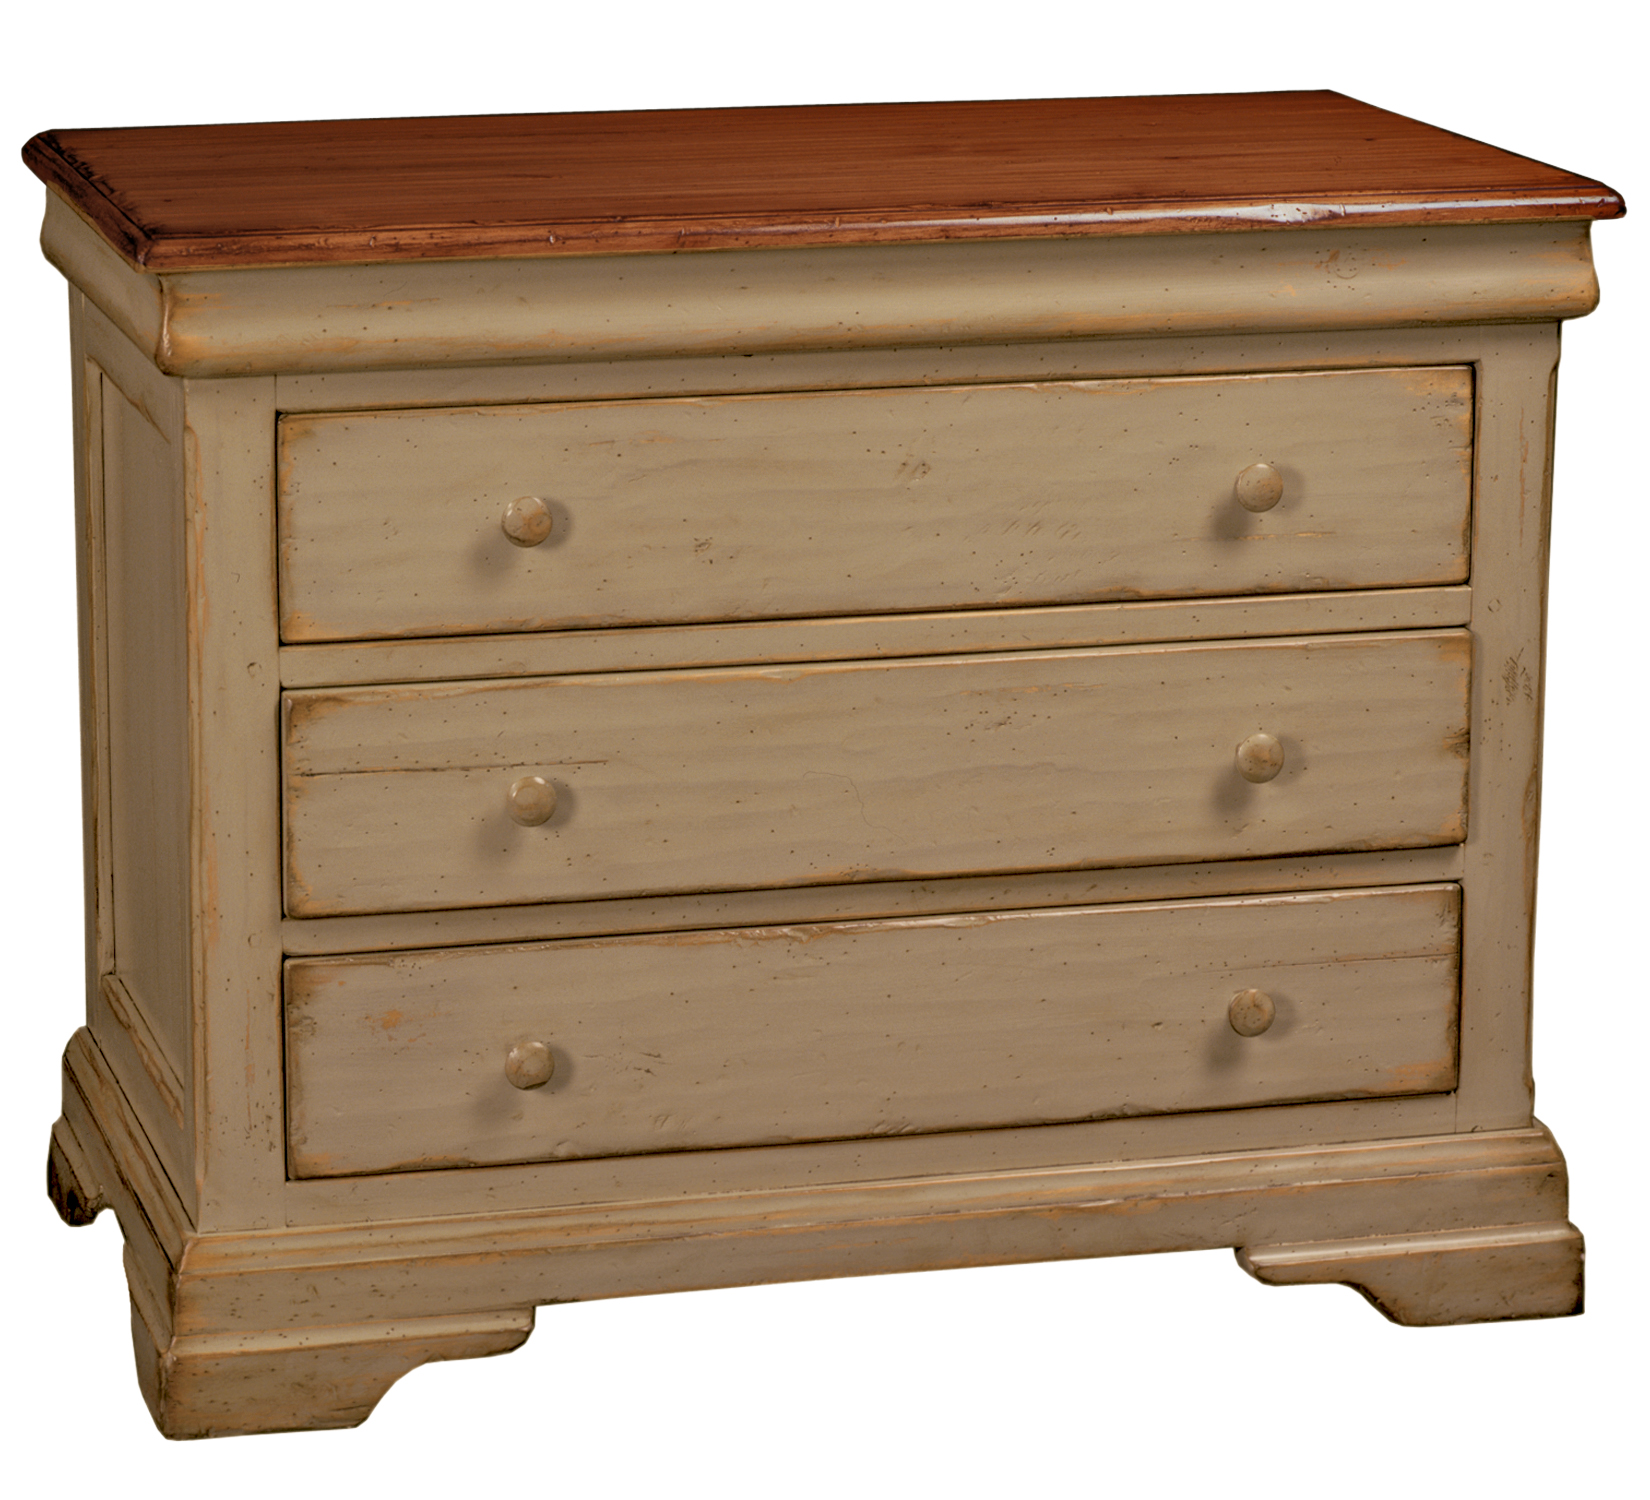 Duxbury traditional / transitional chest of drawers dresser by Woodland furniture in Idaho falls